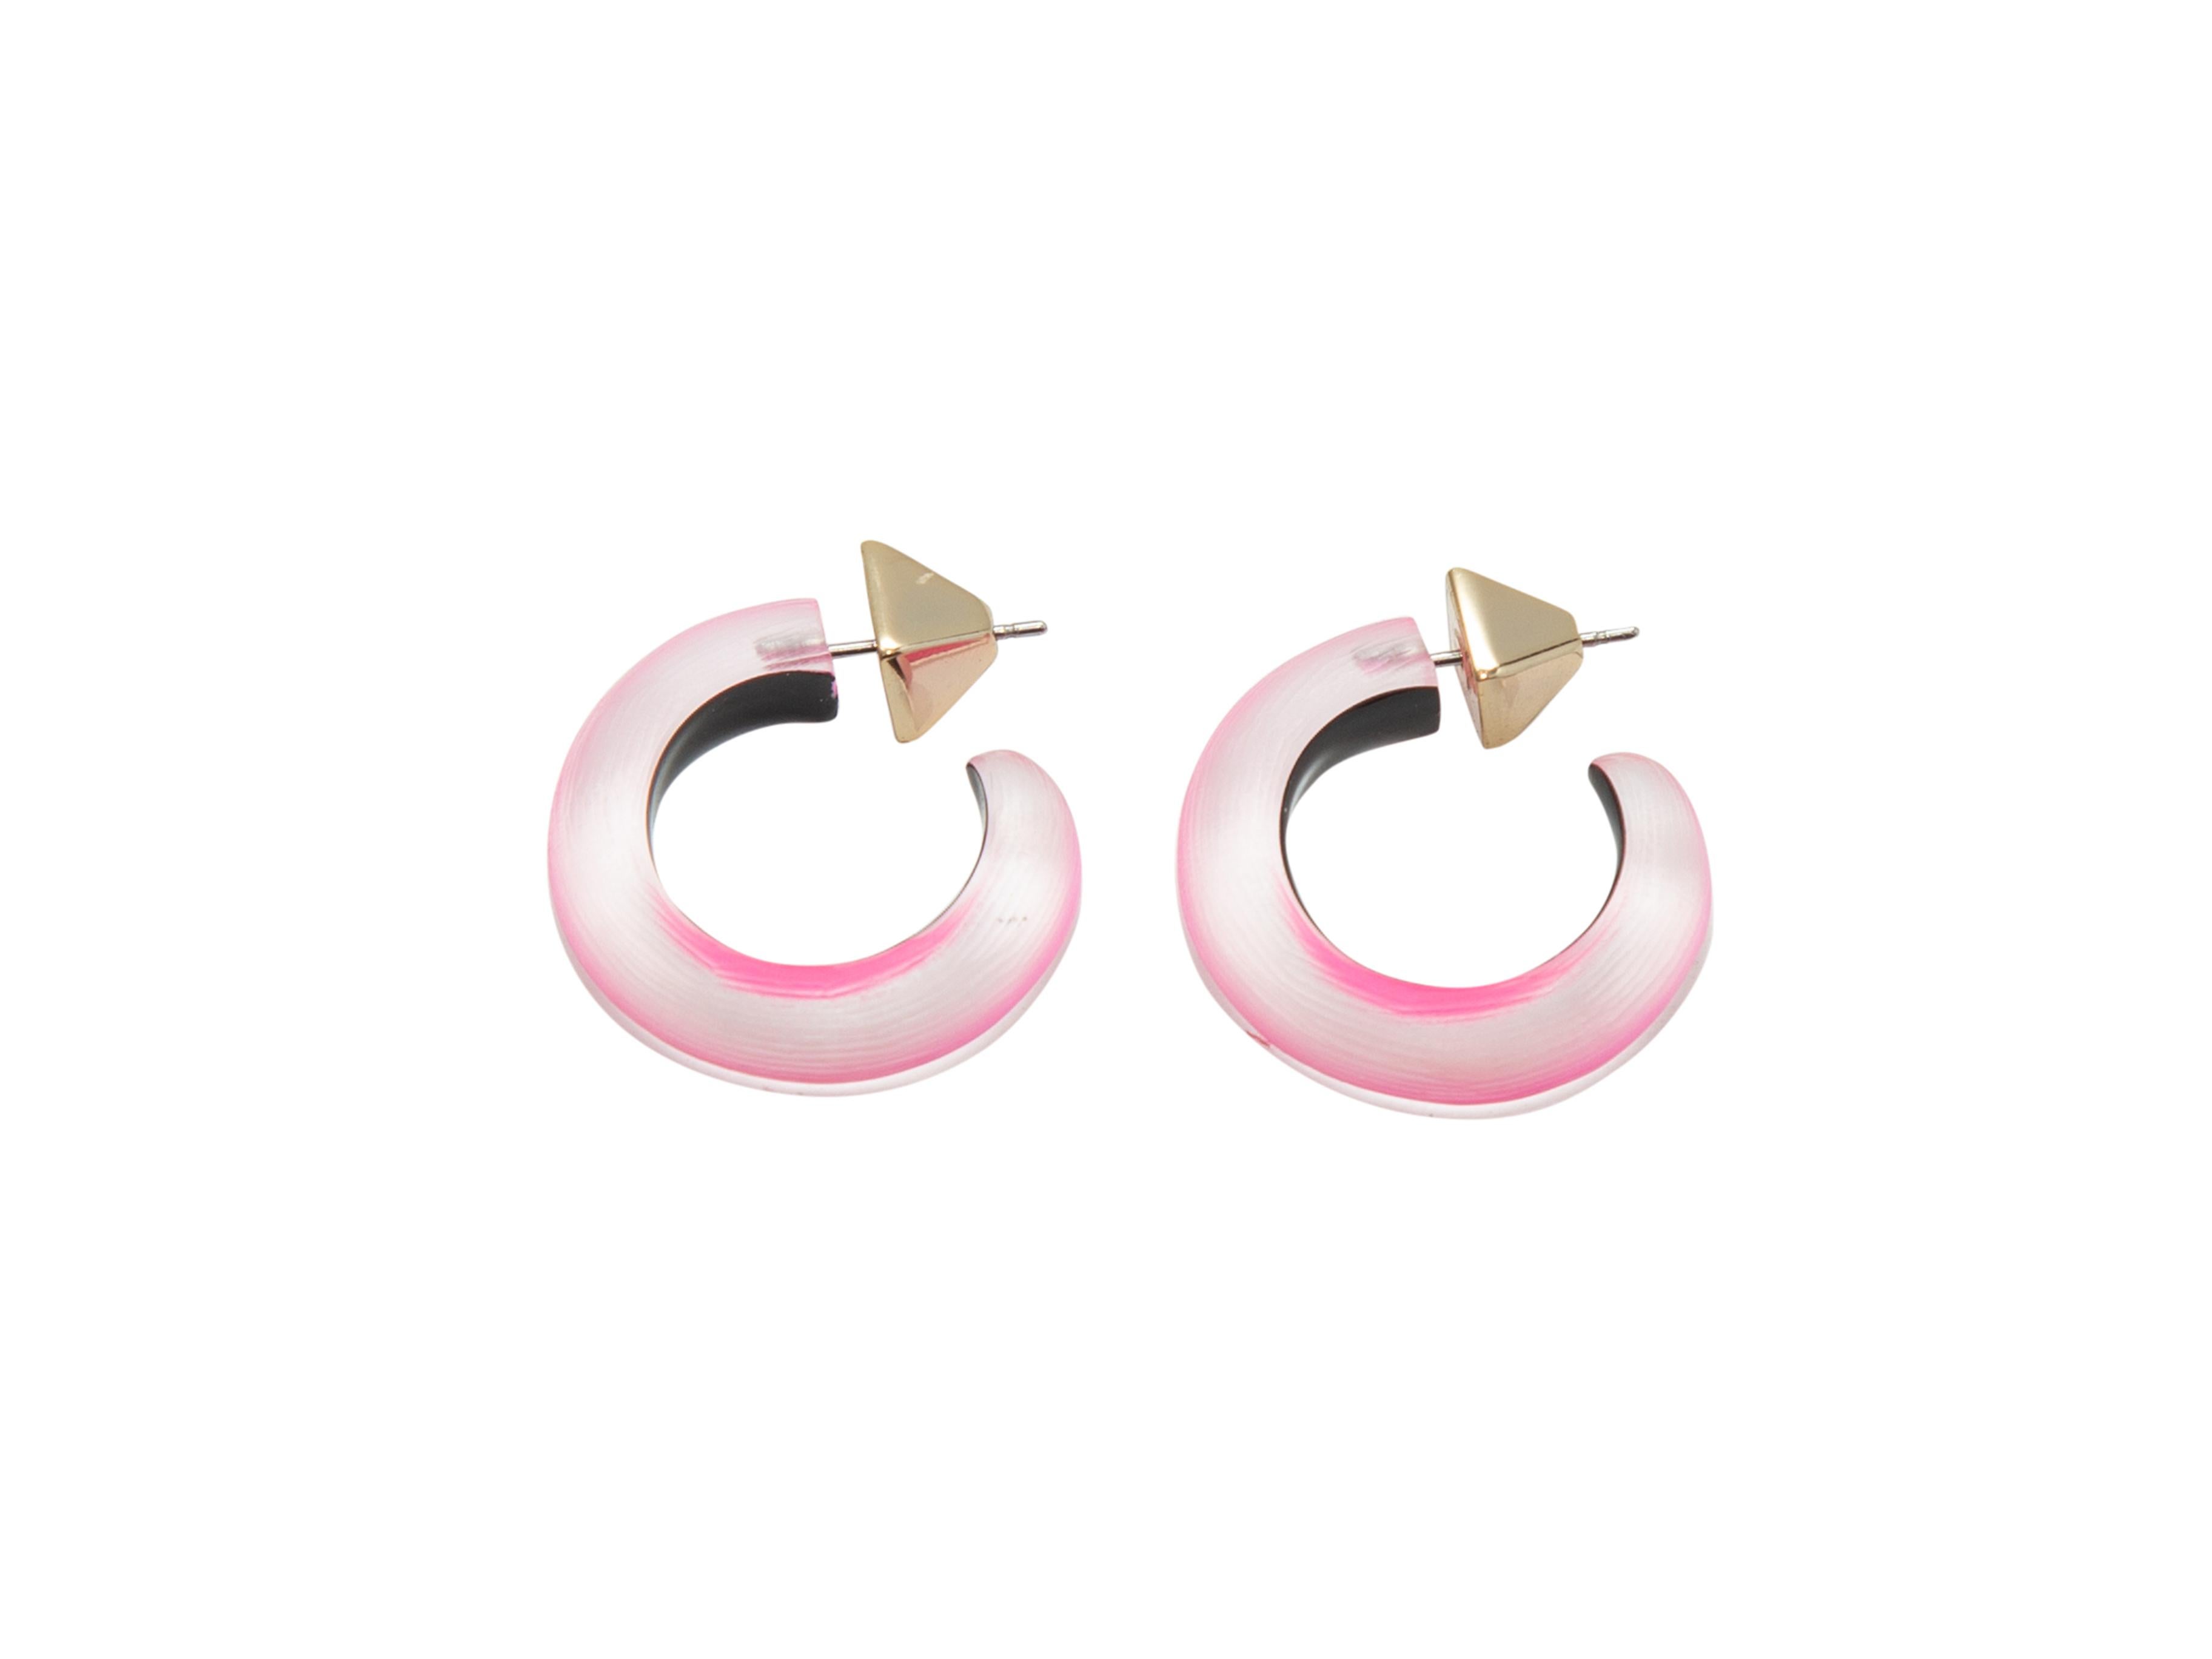 Product details: Pink lucite hoop earrings by Alexis Bittar. 0.9